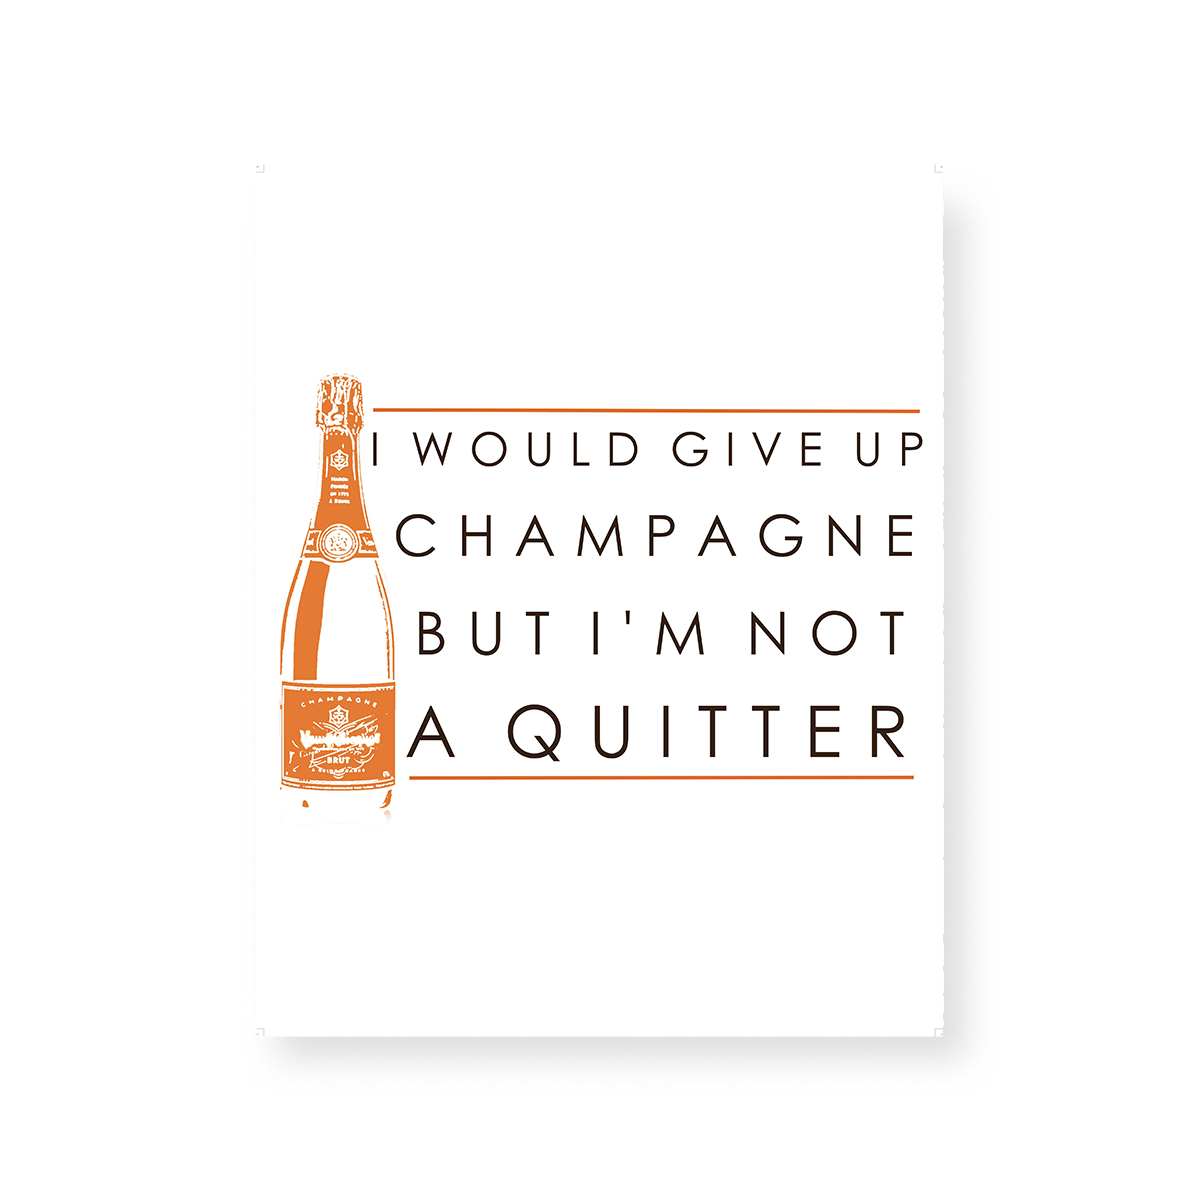 Gallery Print Never Quit Champagne Print Katie Kime